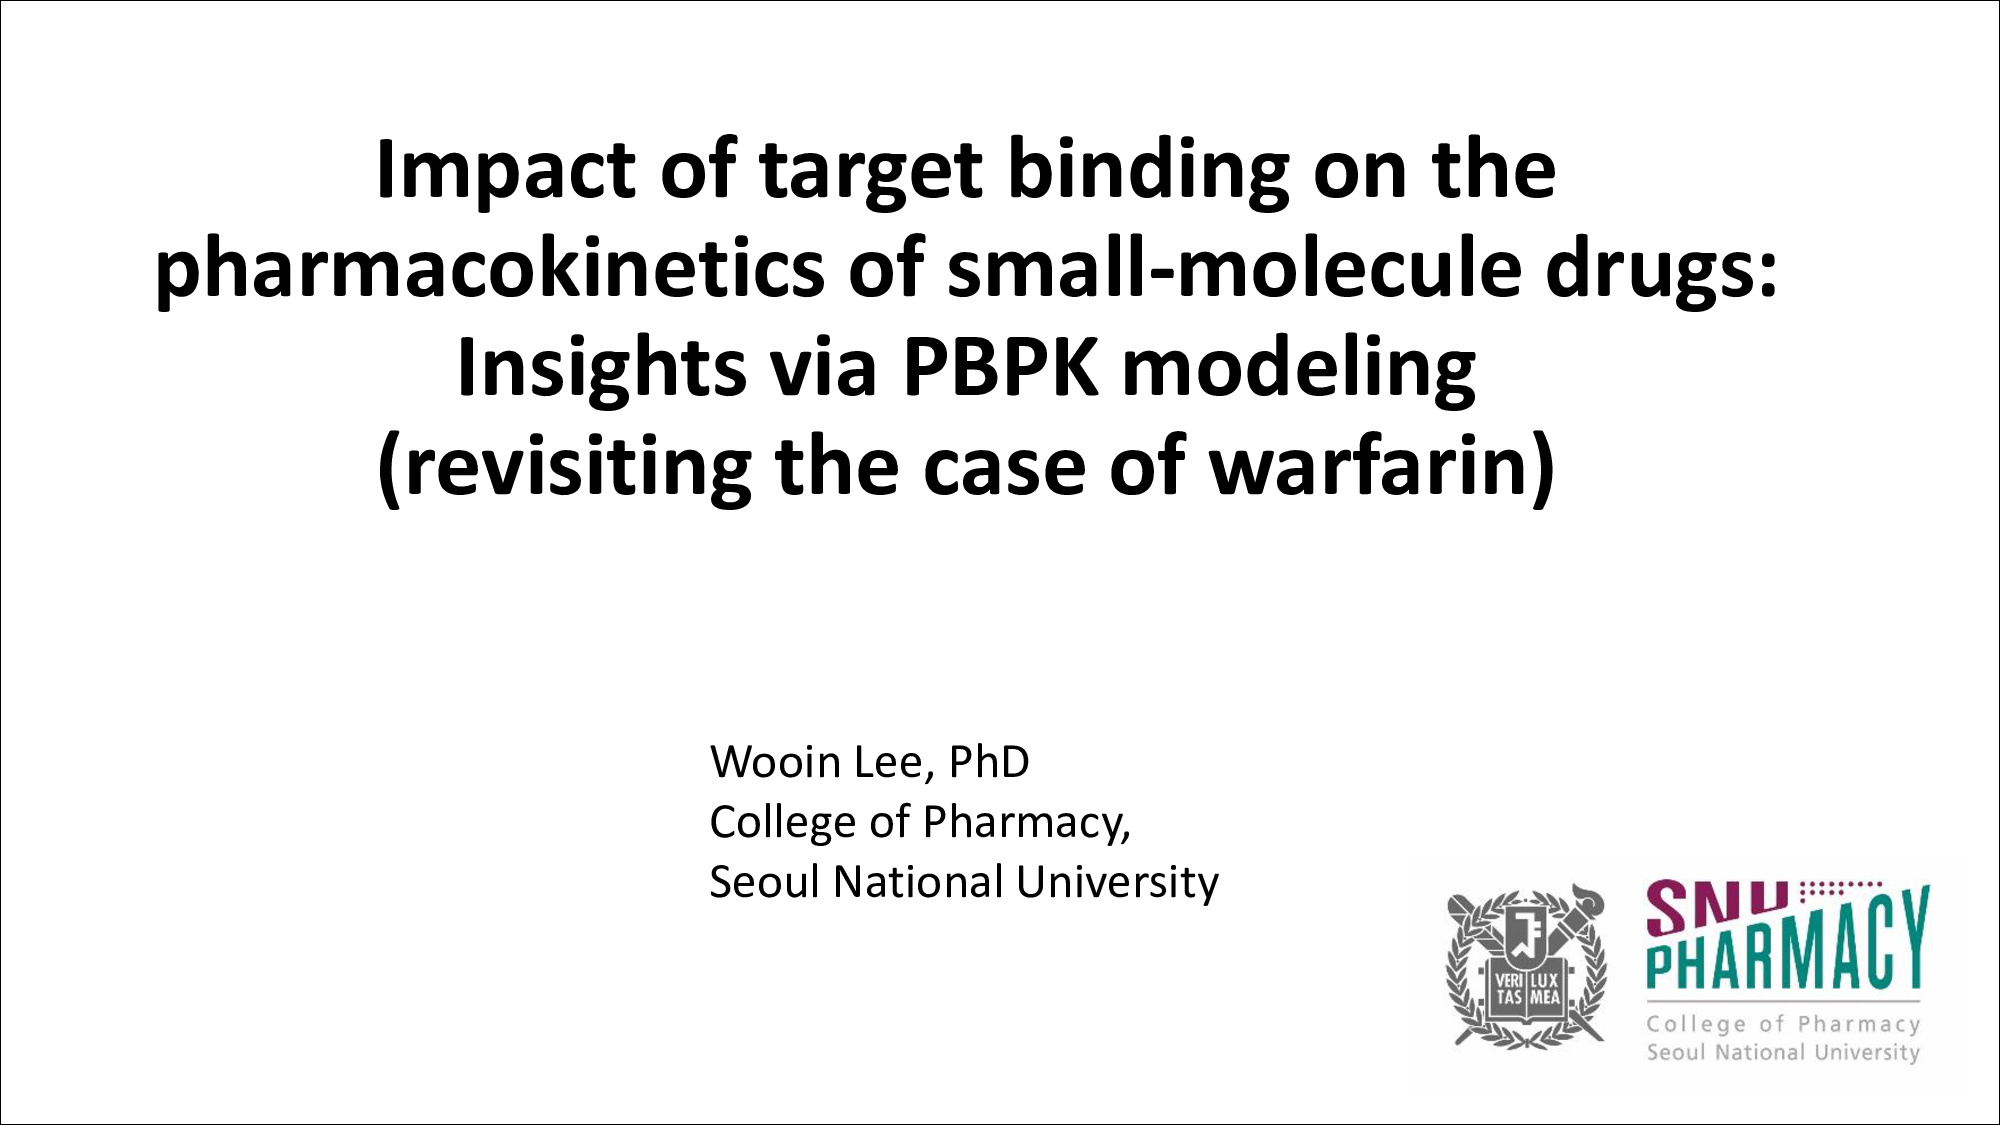 Impact of target binding on the pharmacokinetics of small-molecule drugs: Insights via PBPK modeling